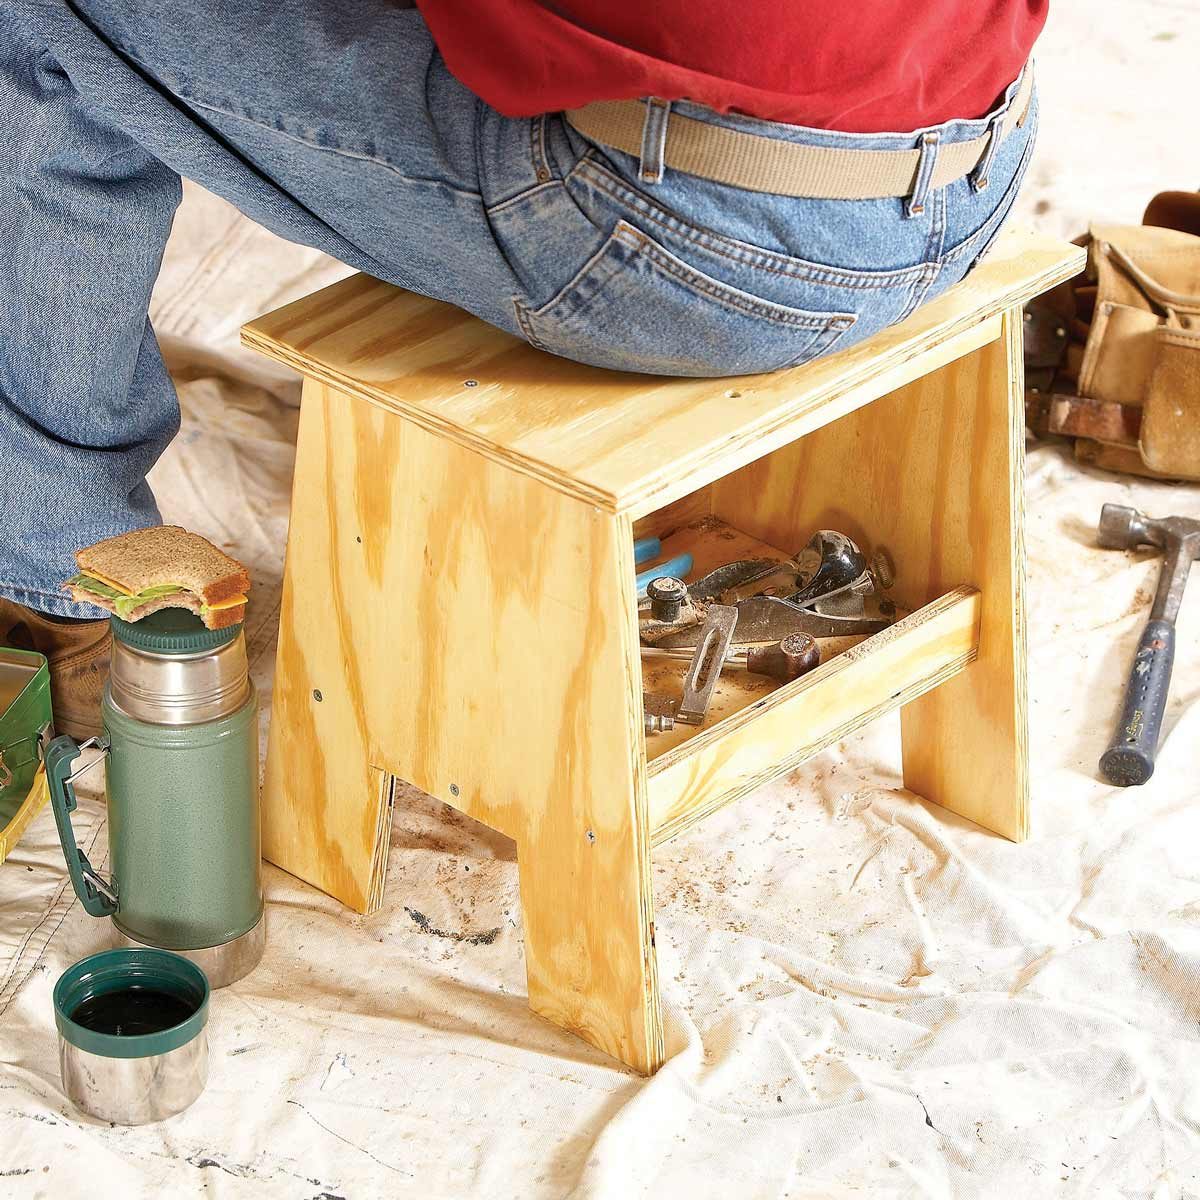 Woodworking projects to make